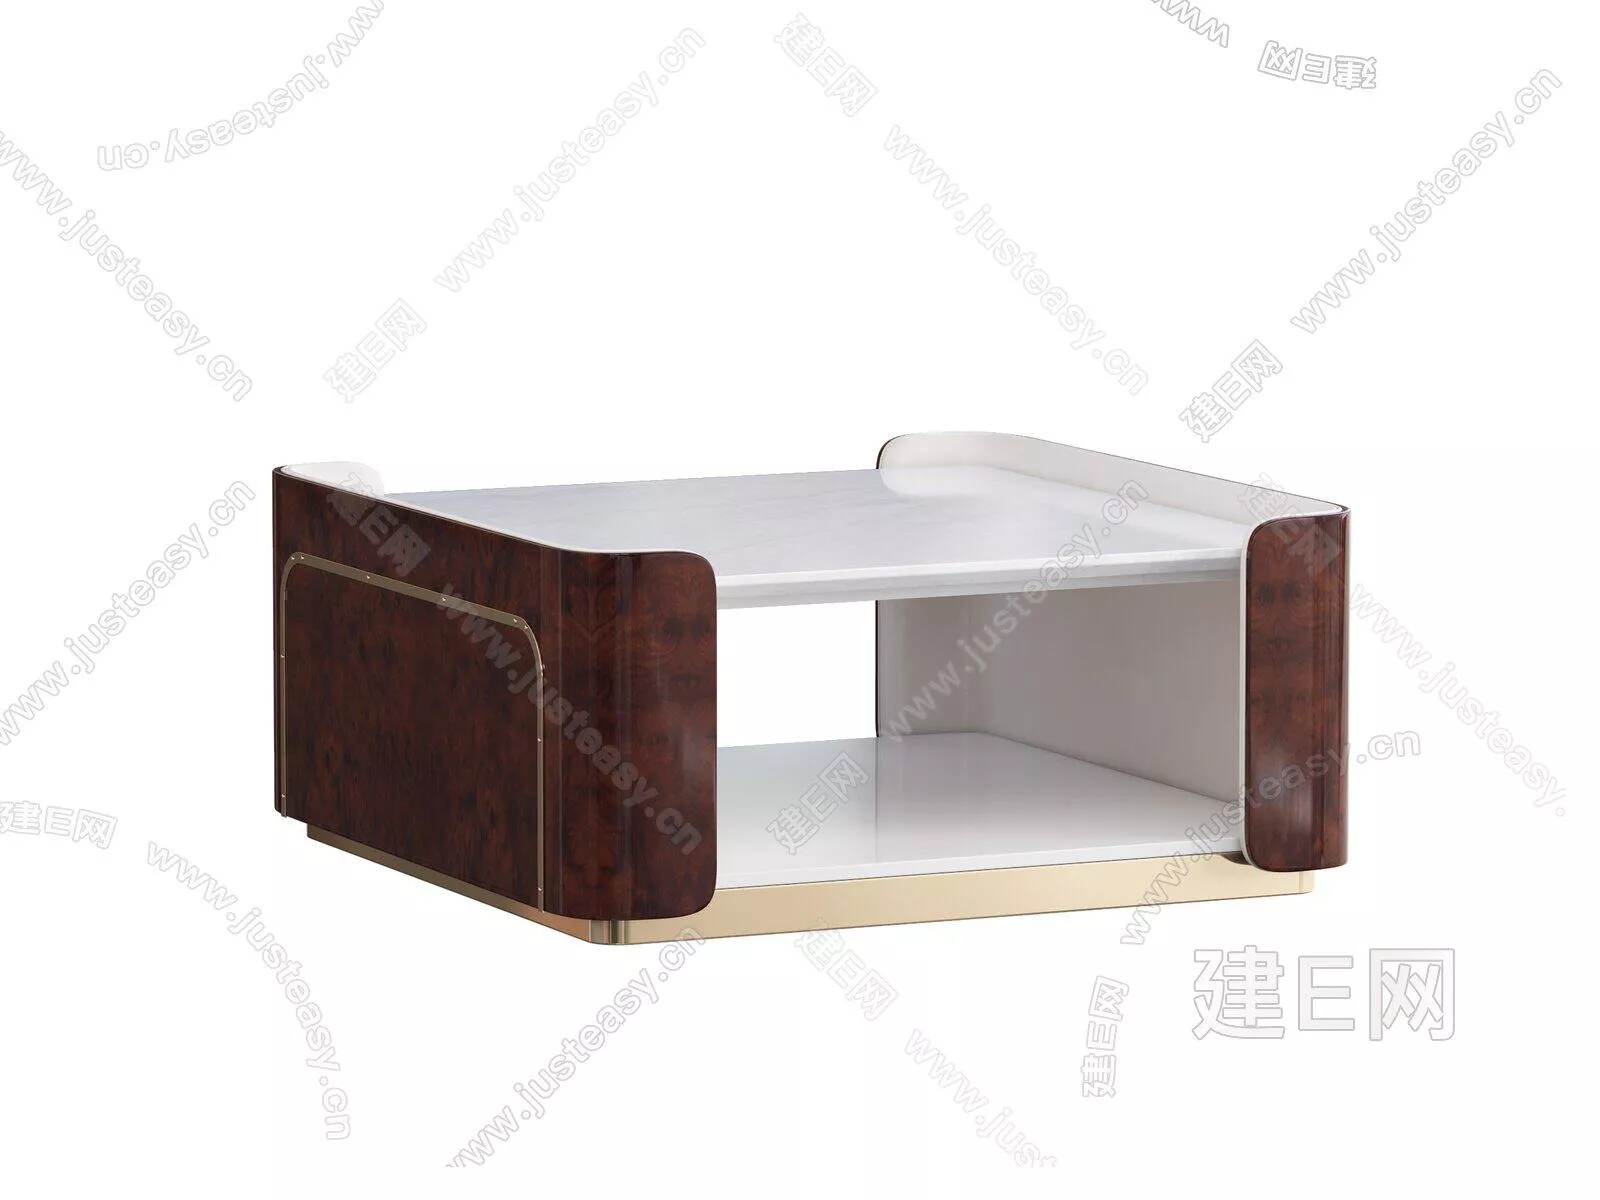 MODERN COFFEE TABLE - SKETCHUP 3D MODEL - ENSCAPE - 104941575